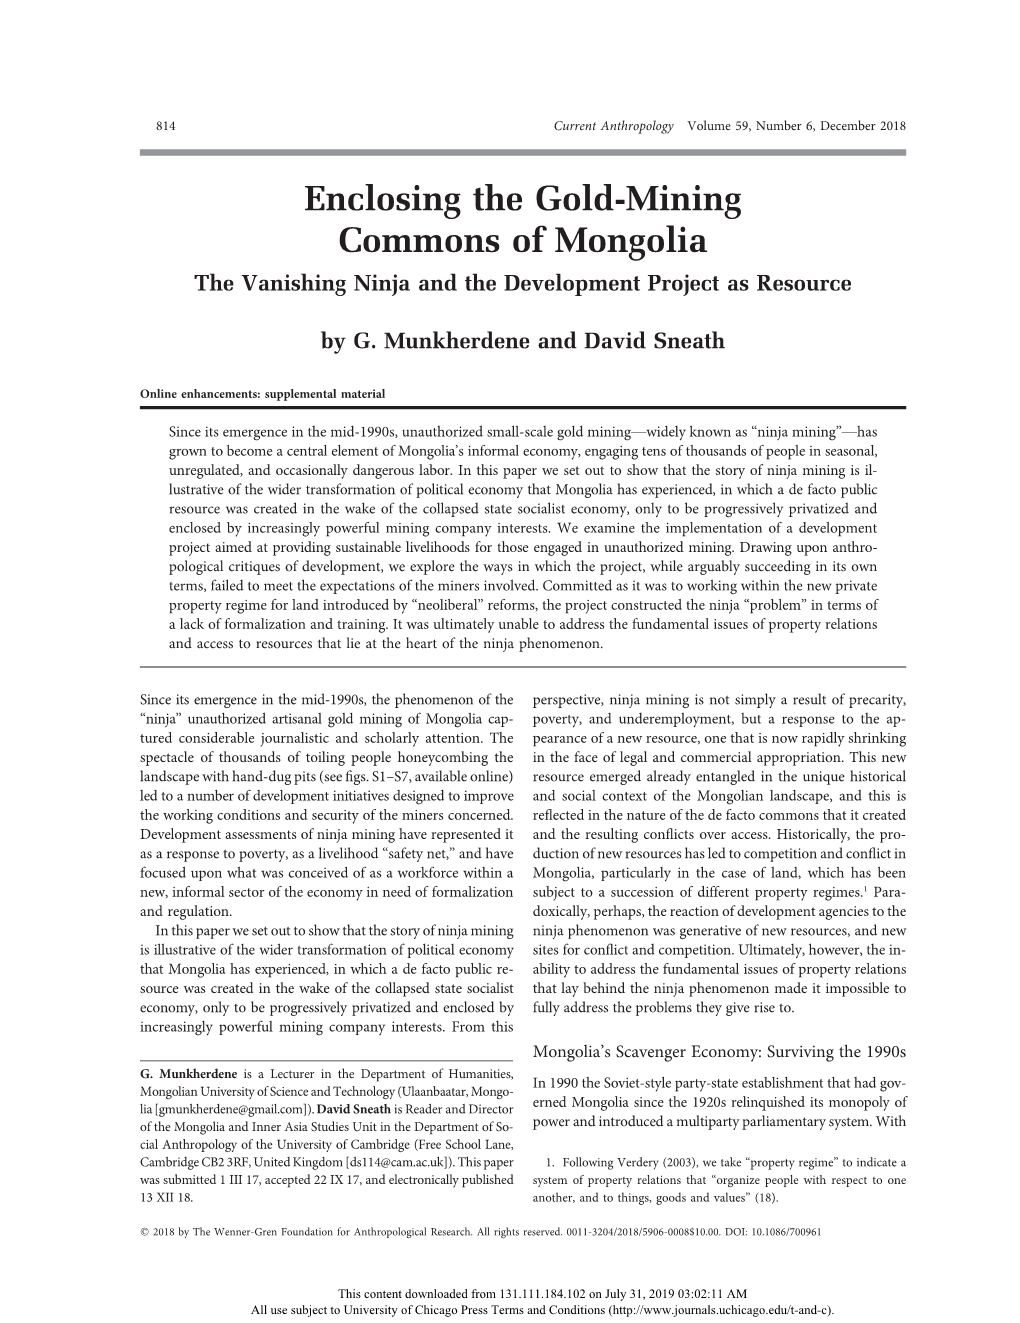 Enclosing the Gold-Mining Commons of Mongolia: the Vanishing Ninja and the Development Project As Resource